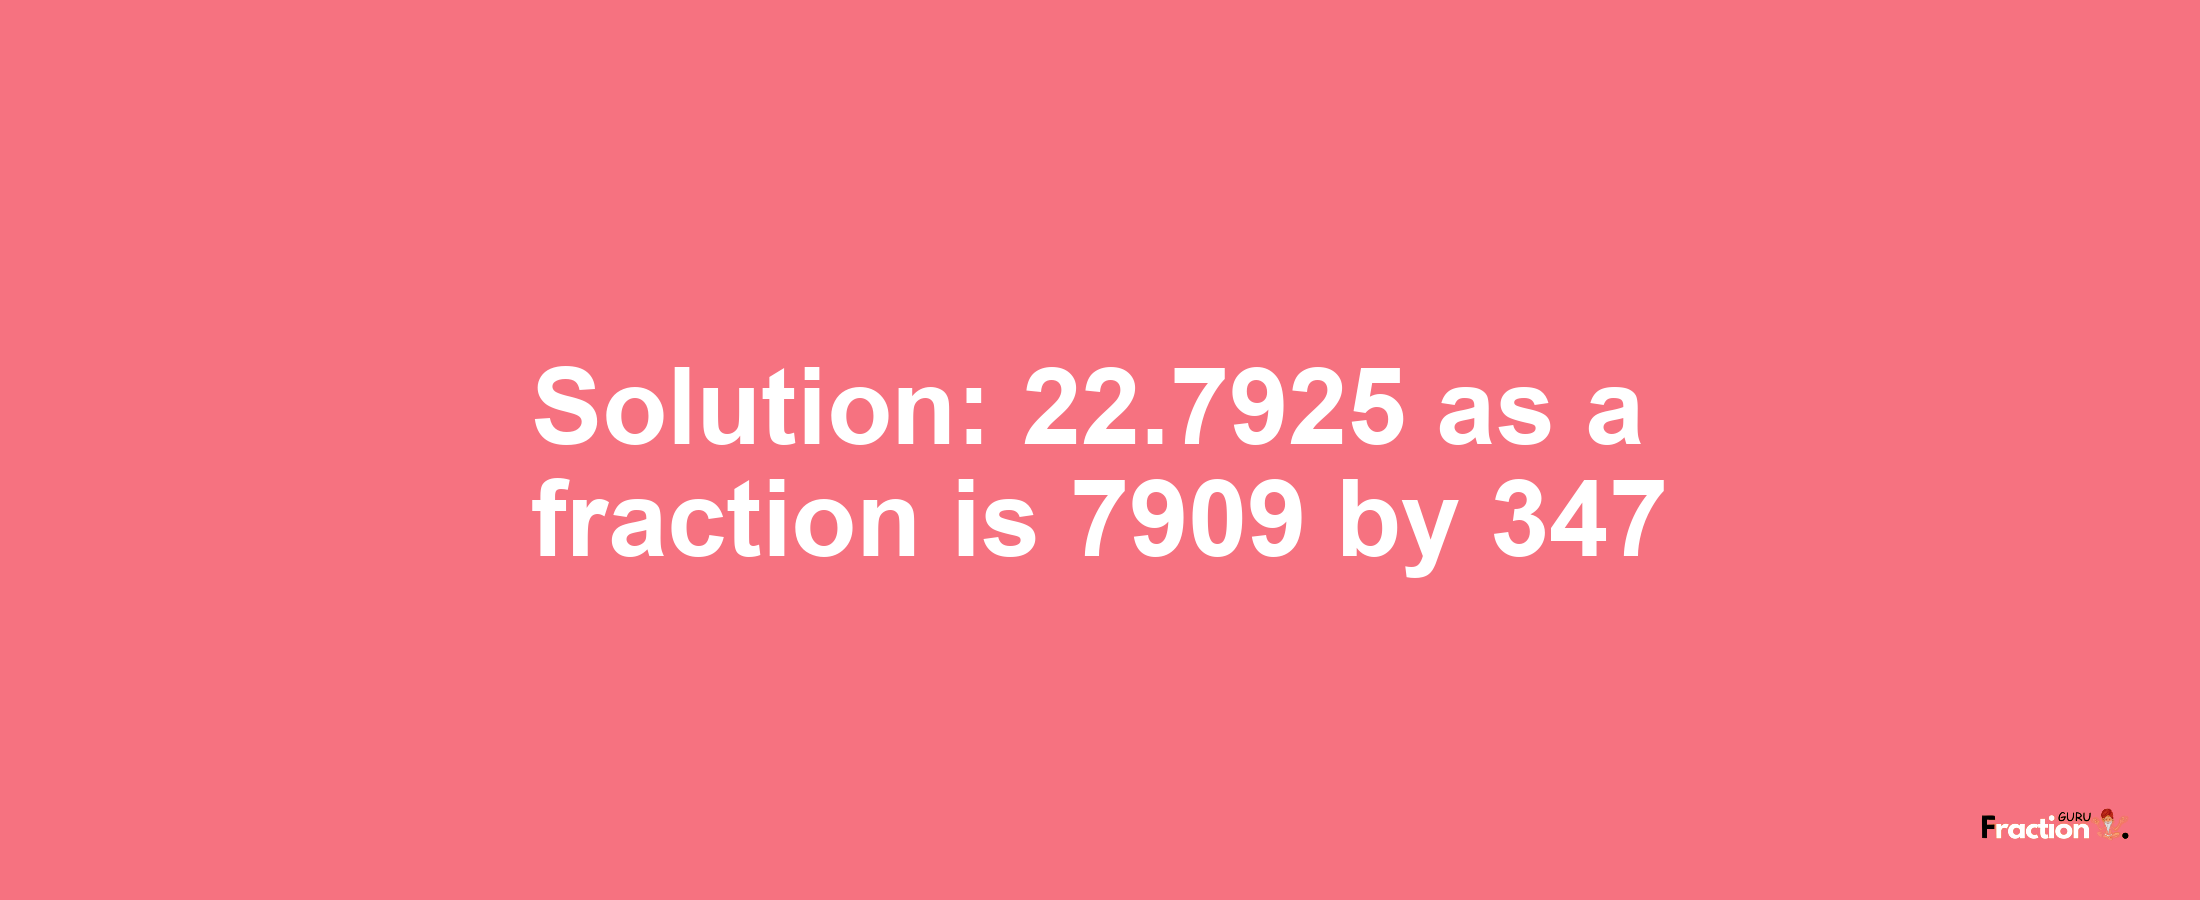 Solution:22.7925 as a fraction is 7909/347